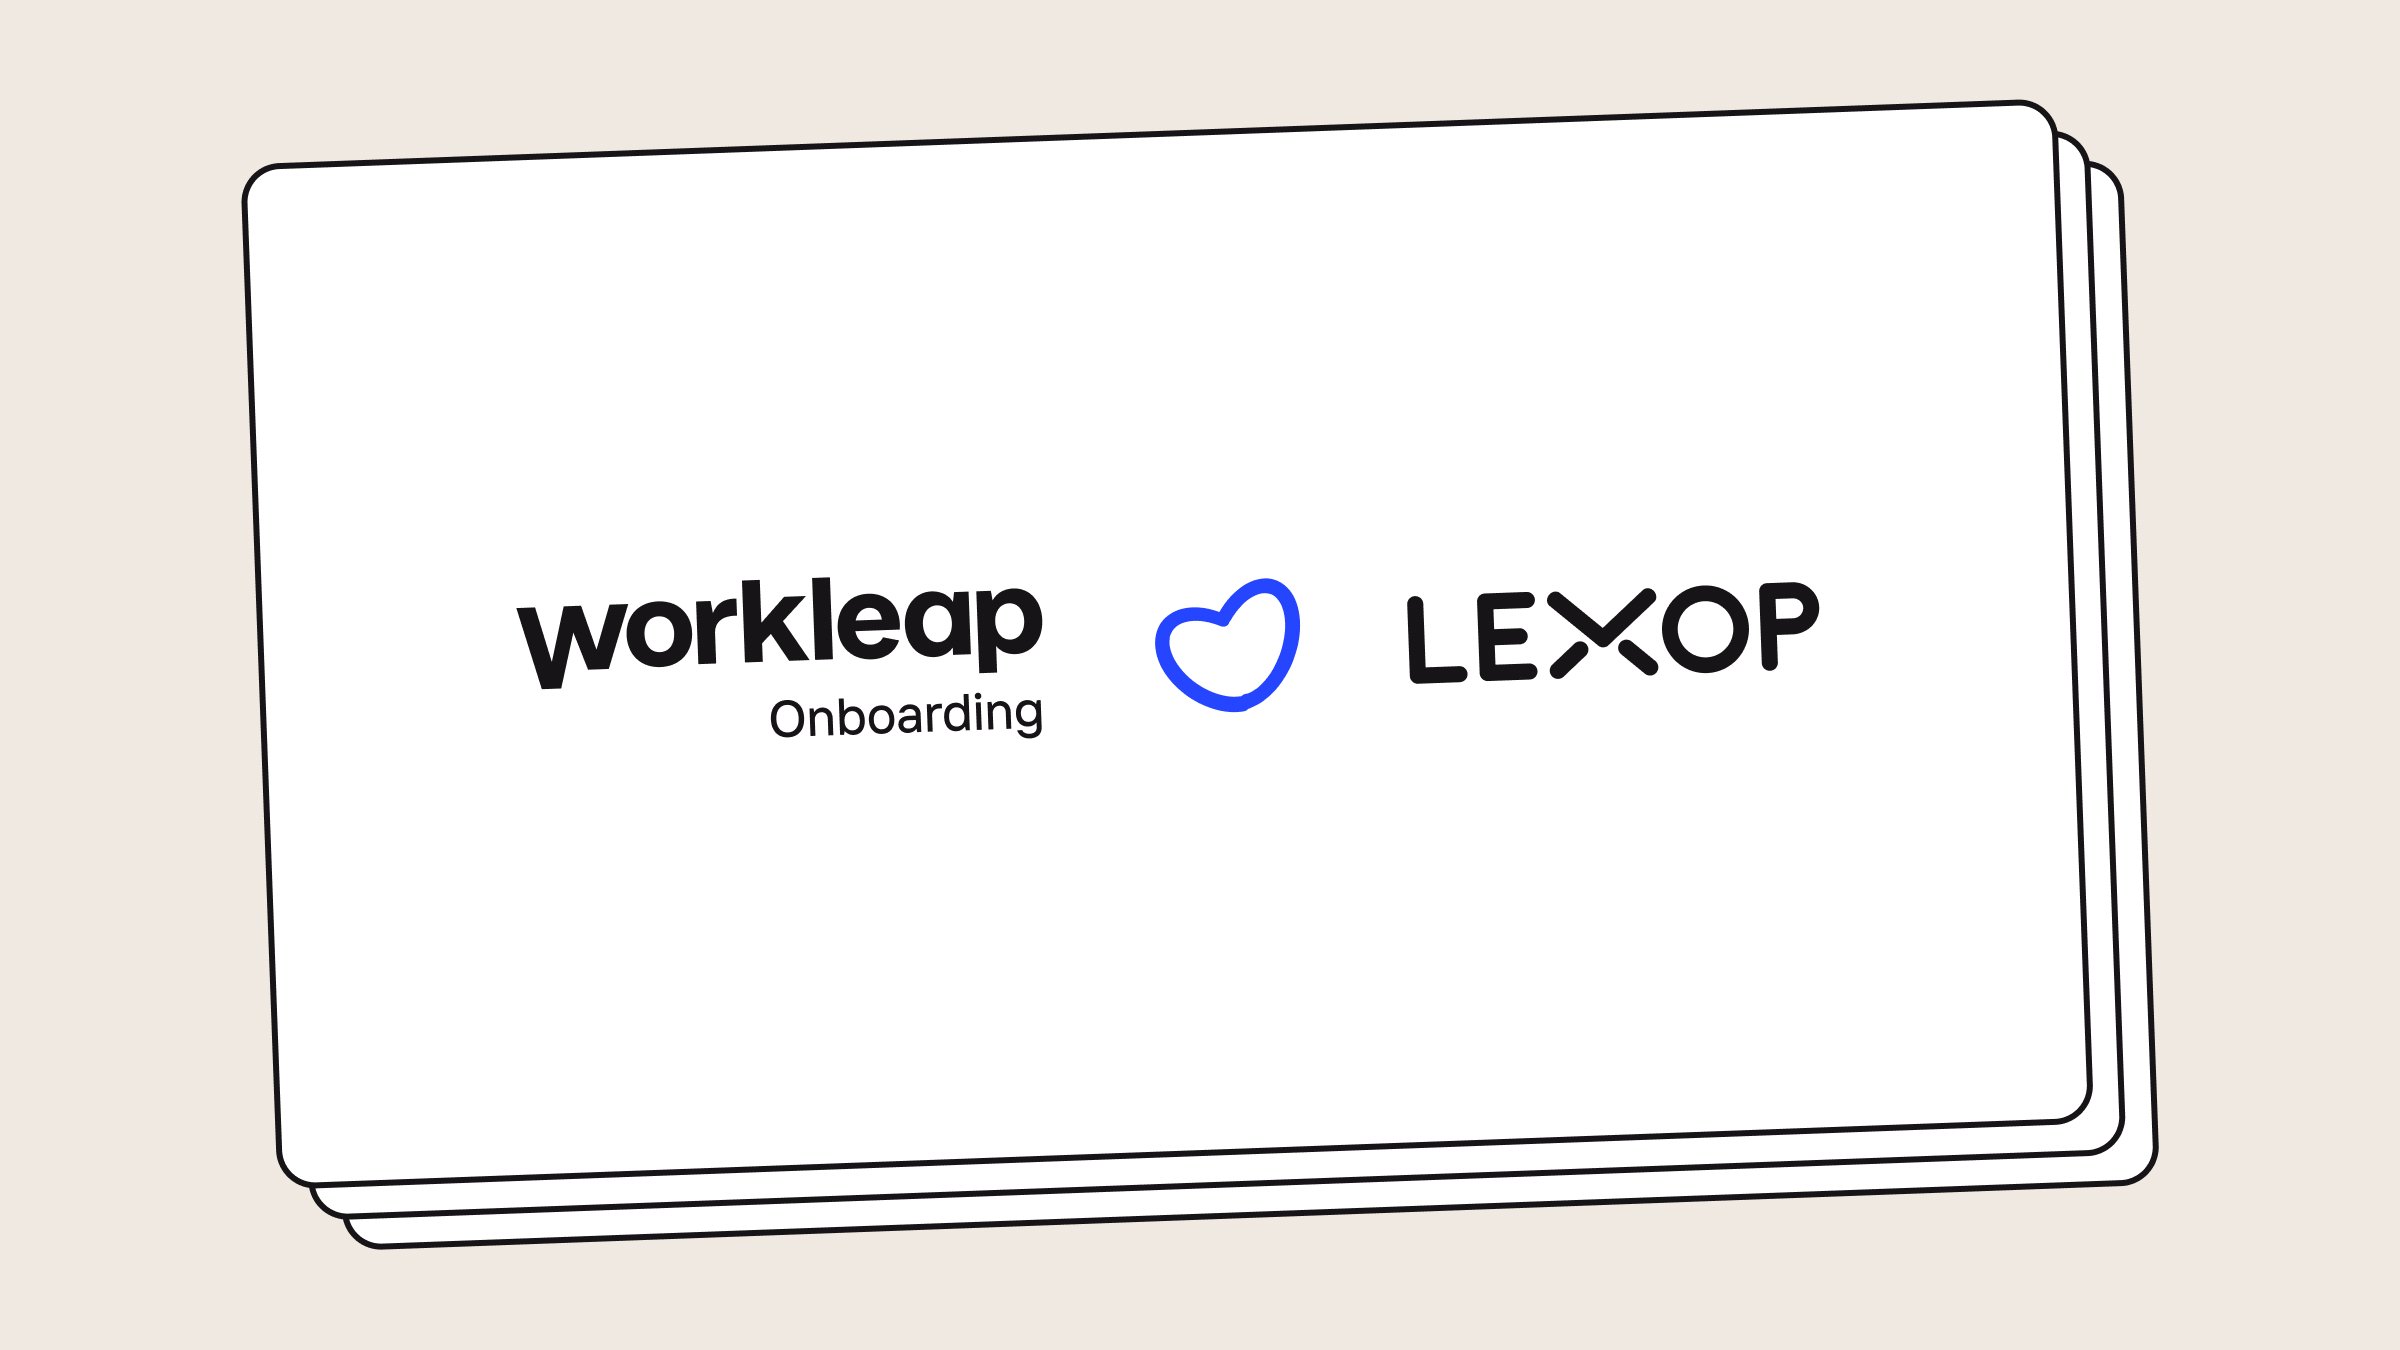 Lexop using Workleap to onboard their new hires